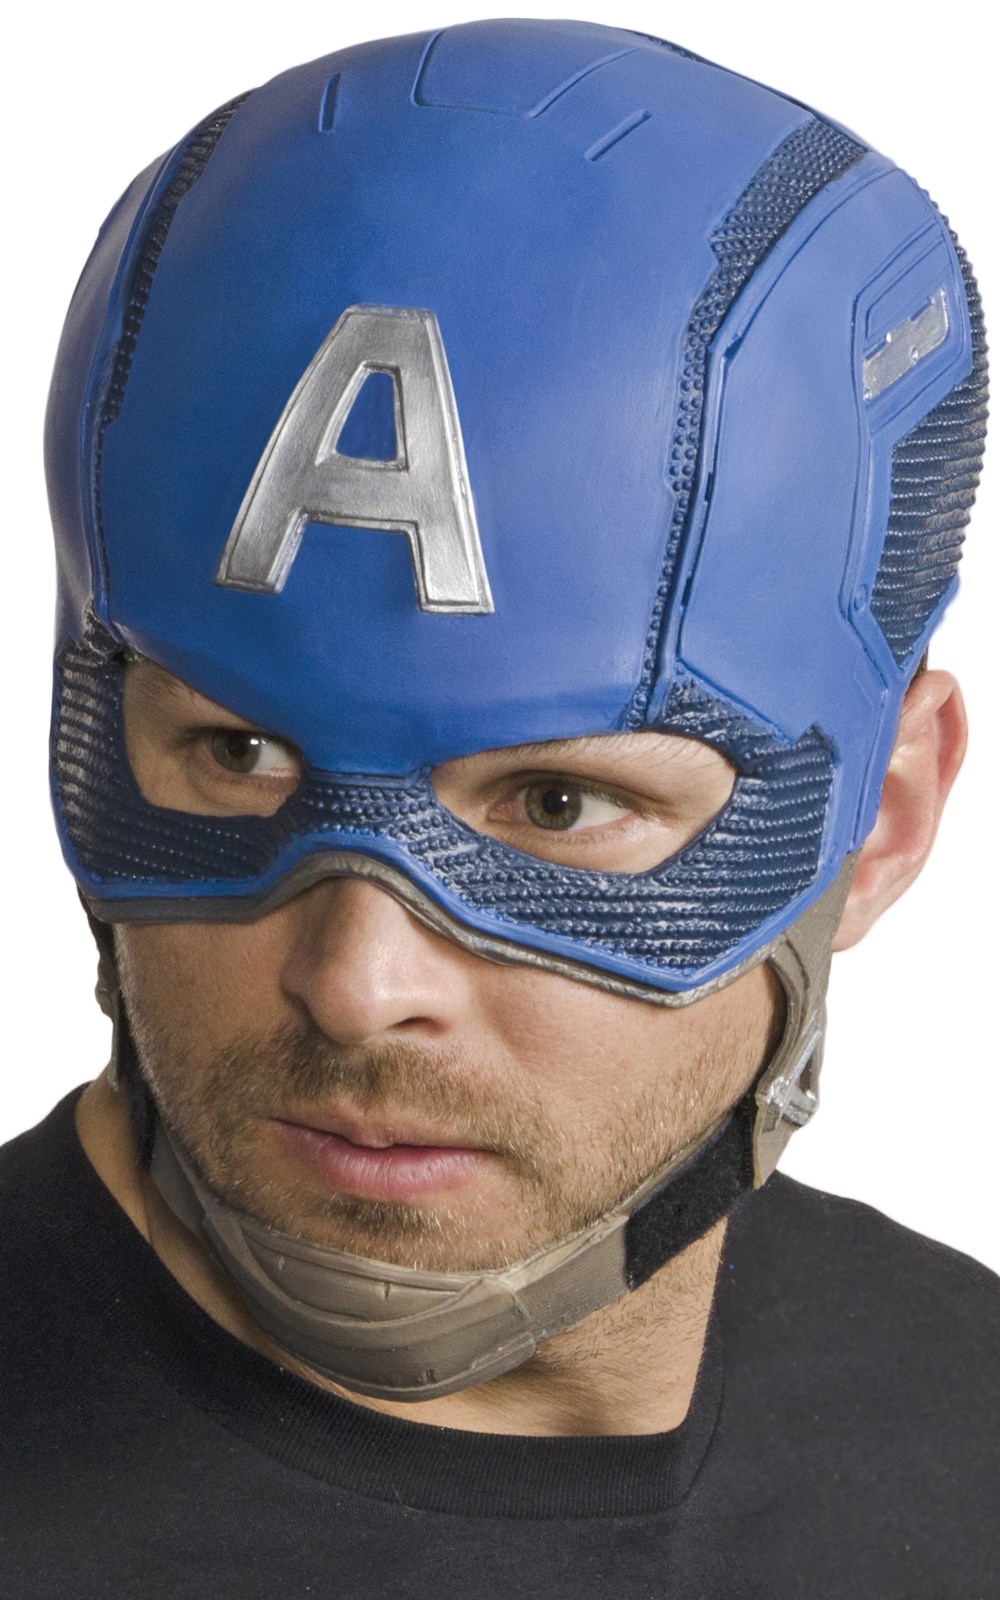 Avengers 2 - Age of Ultron: Adult Captain America Molded Mask